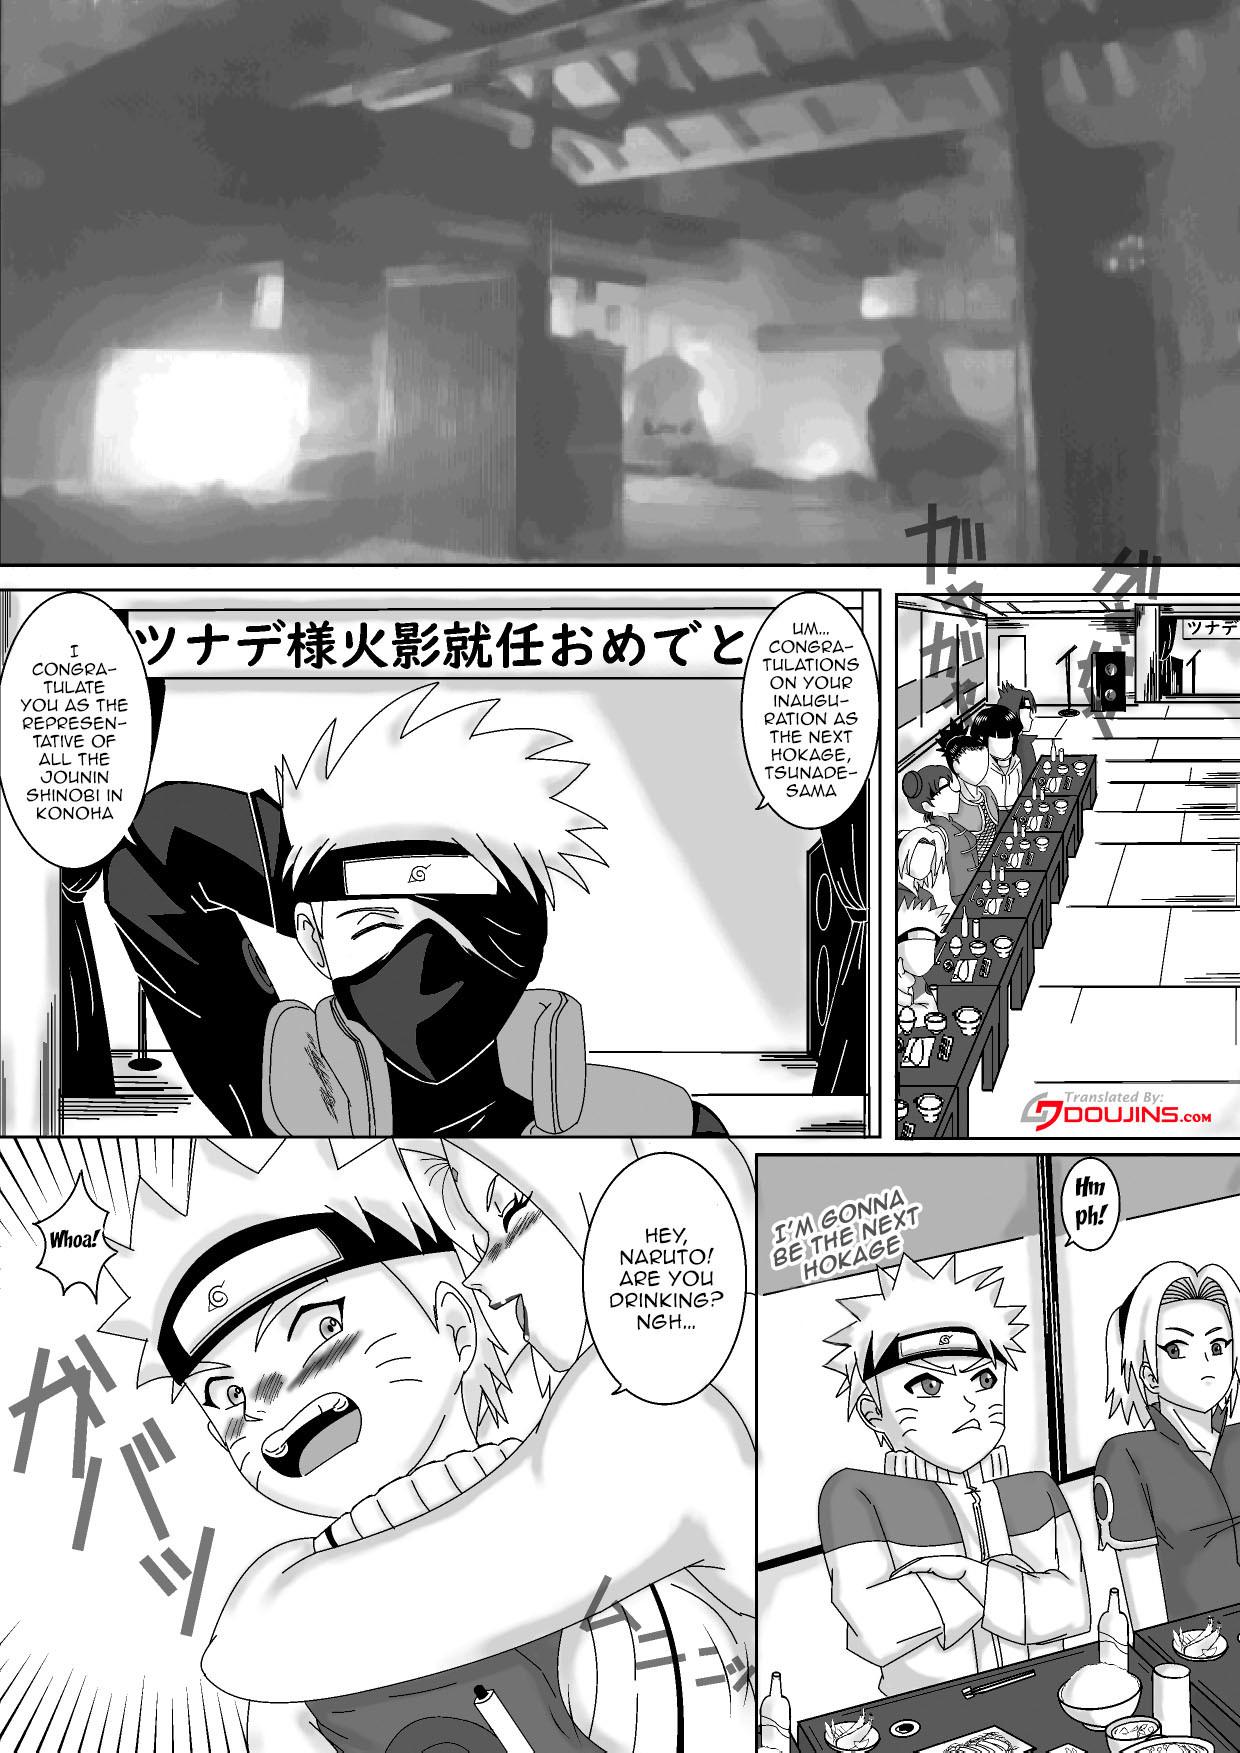 Bra Nomisugite Deisui Shita BBA to Yarimakutta Ken!! | The Case Of Having Sex With This Old Lady After She Got Herself Really Drunk - Naruto Cumload - Page 2